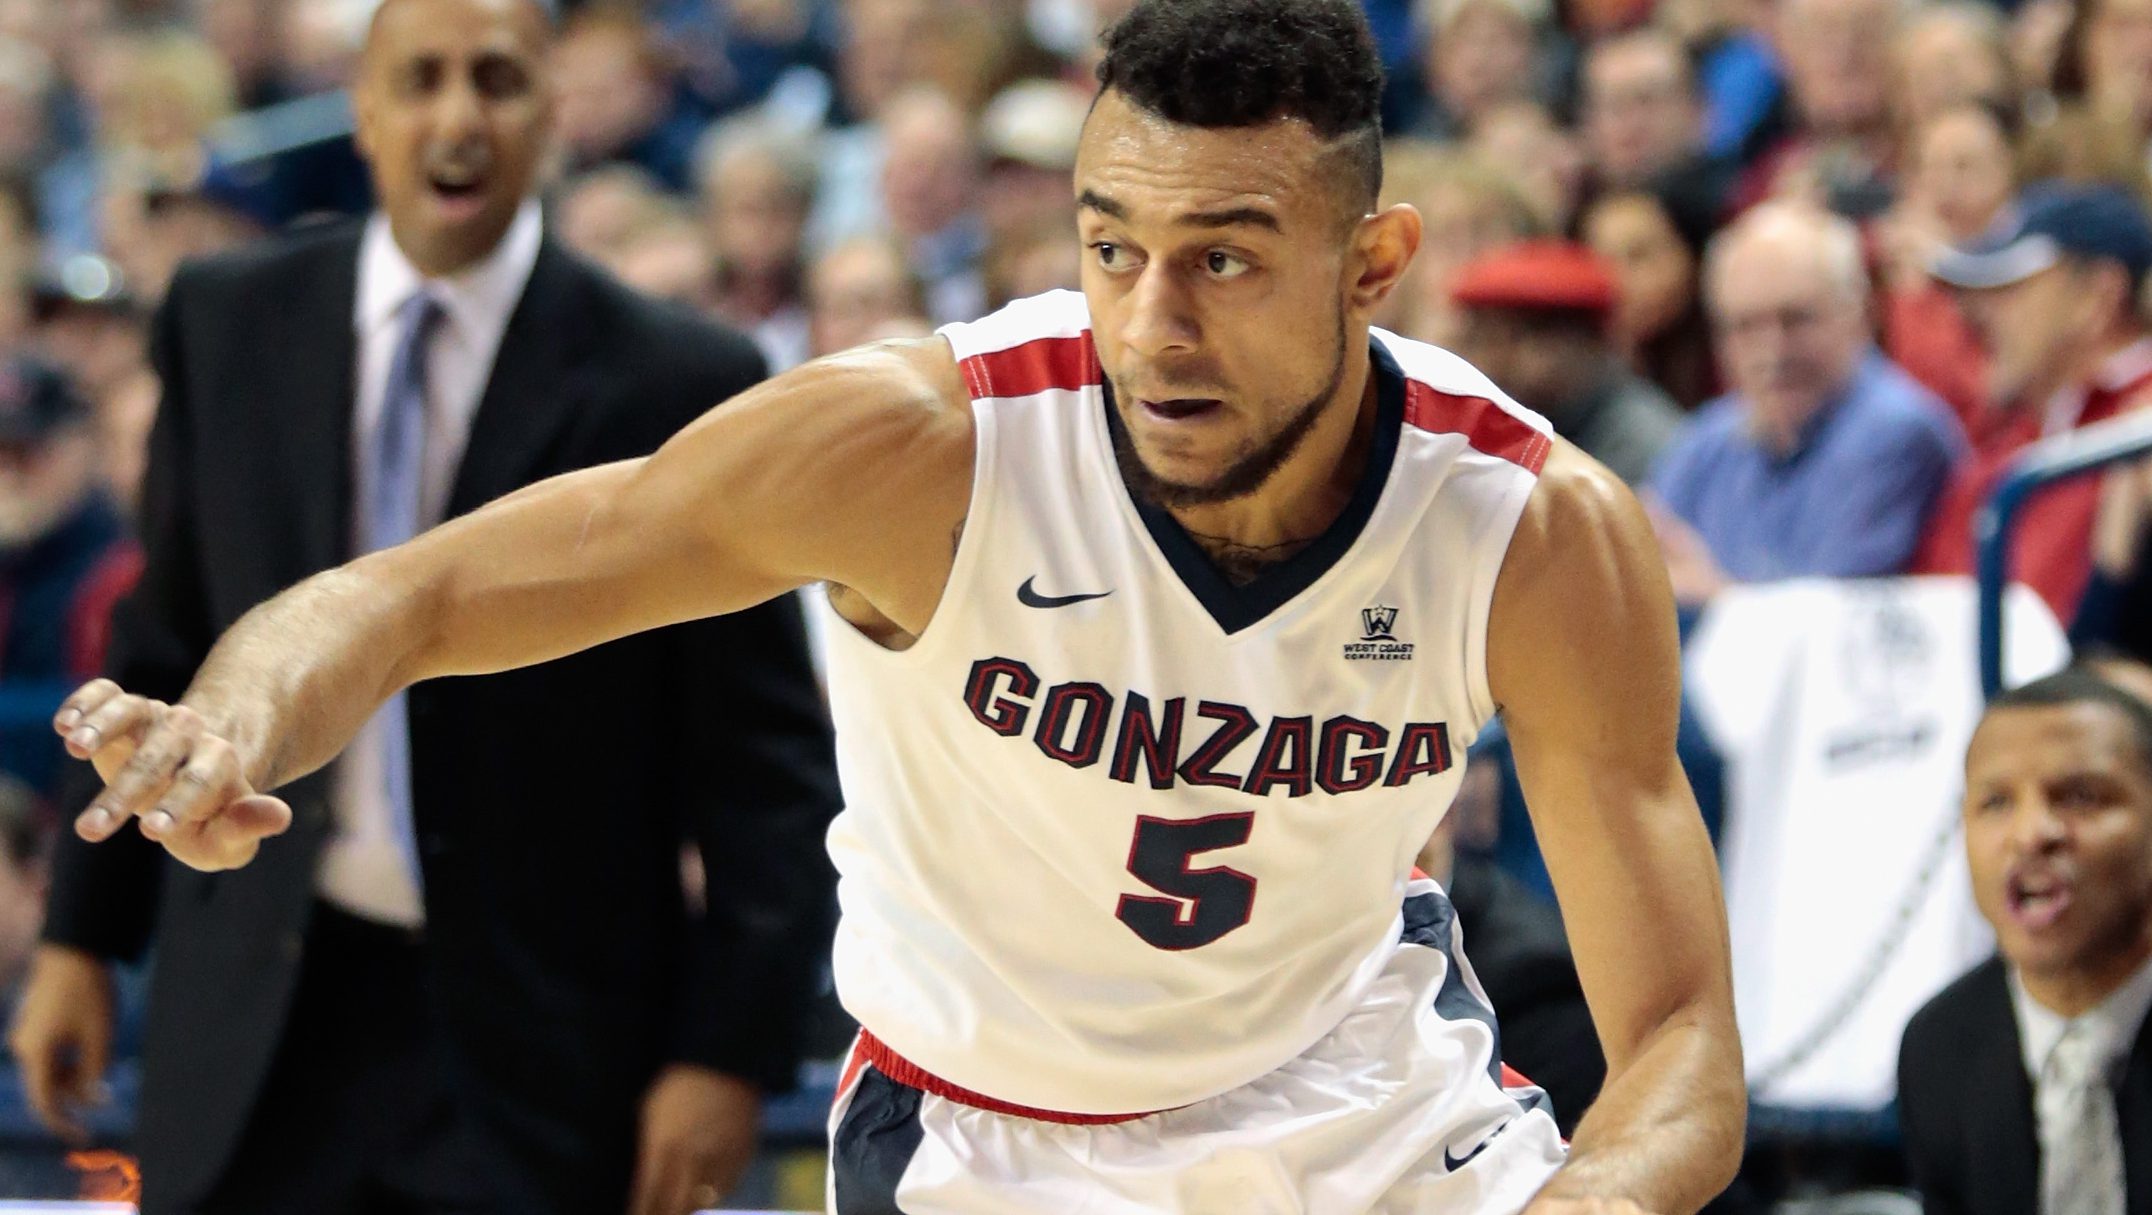 SPOKANE, WA - DECEMBER 07:  Nigel Williams-Goss #5 of the Gonzaga Bulldogs drives against the Washington Huskies in the first half at McCarthey Athletic Center on December 7, 2016 in Spokane, Washington.  Gonzaga defeated Washington 98-71.  (Photo by William Mancebo/Getty Images)